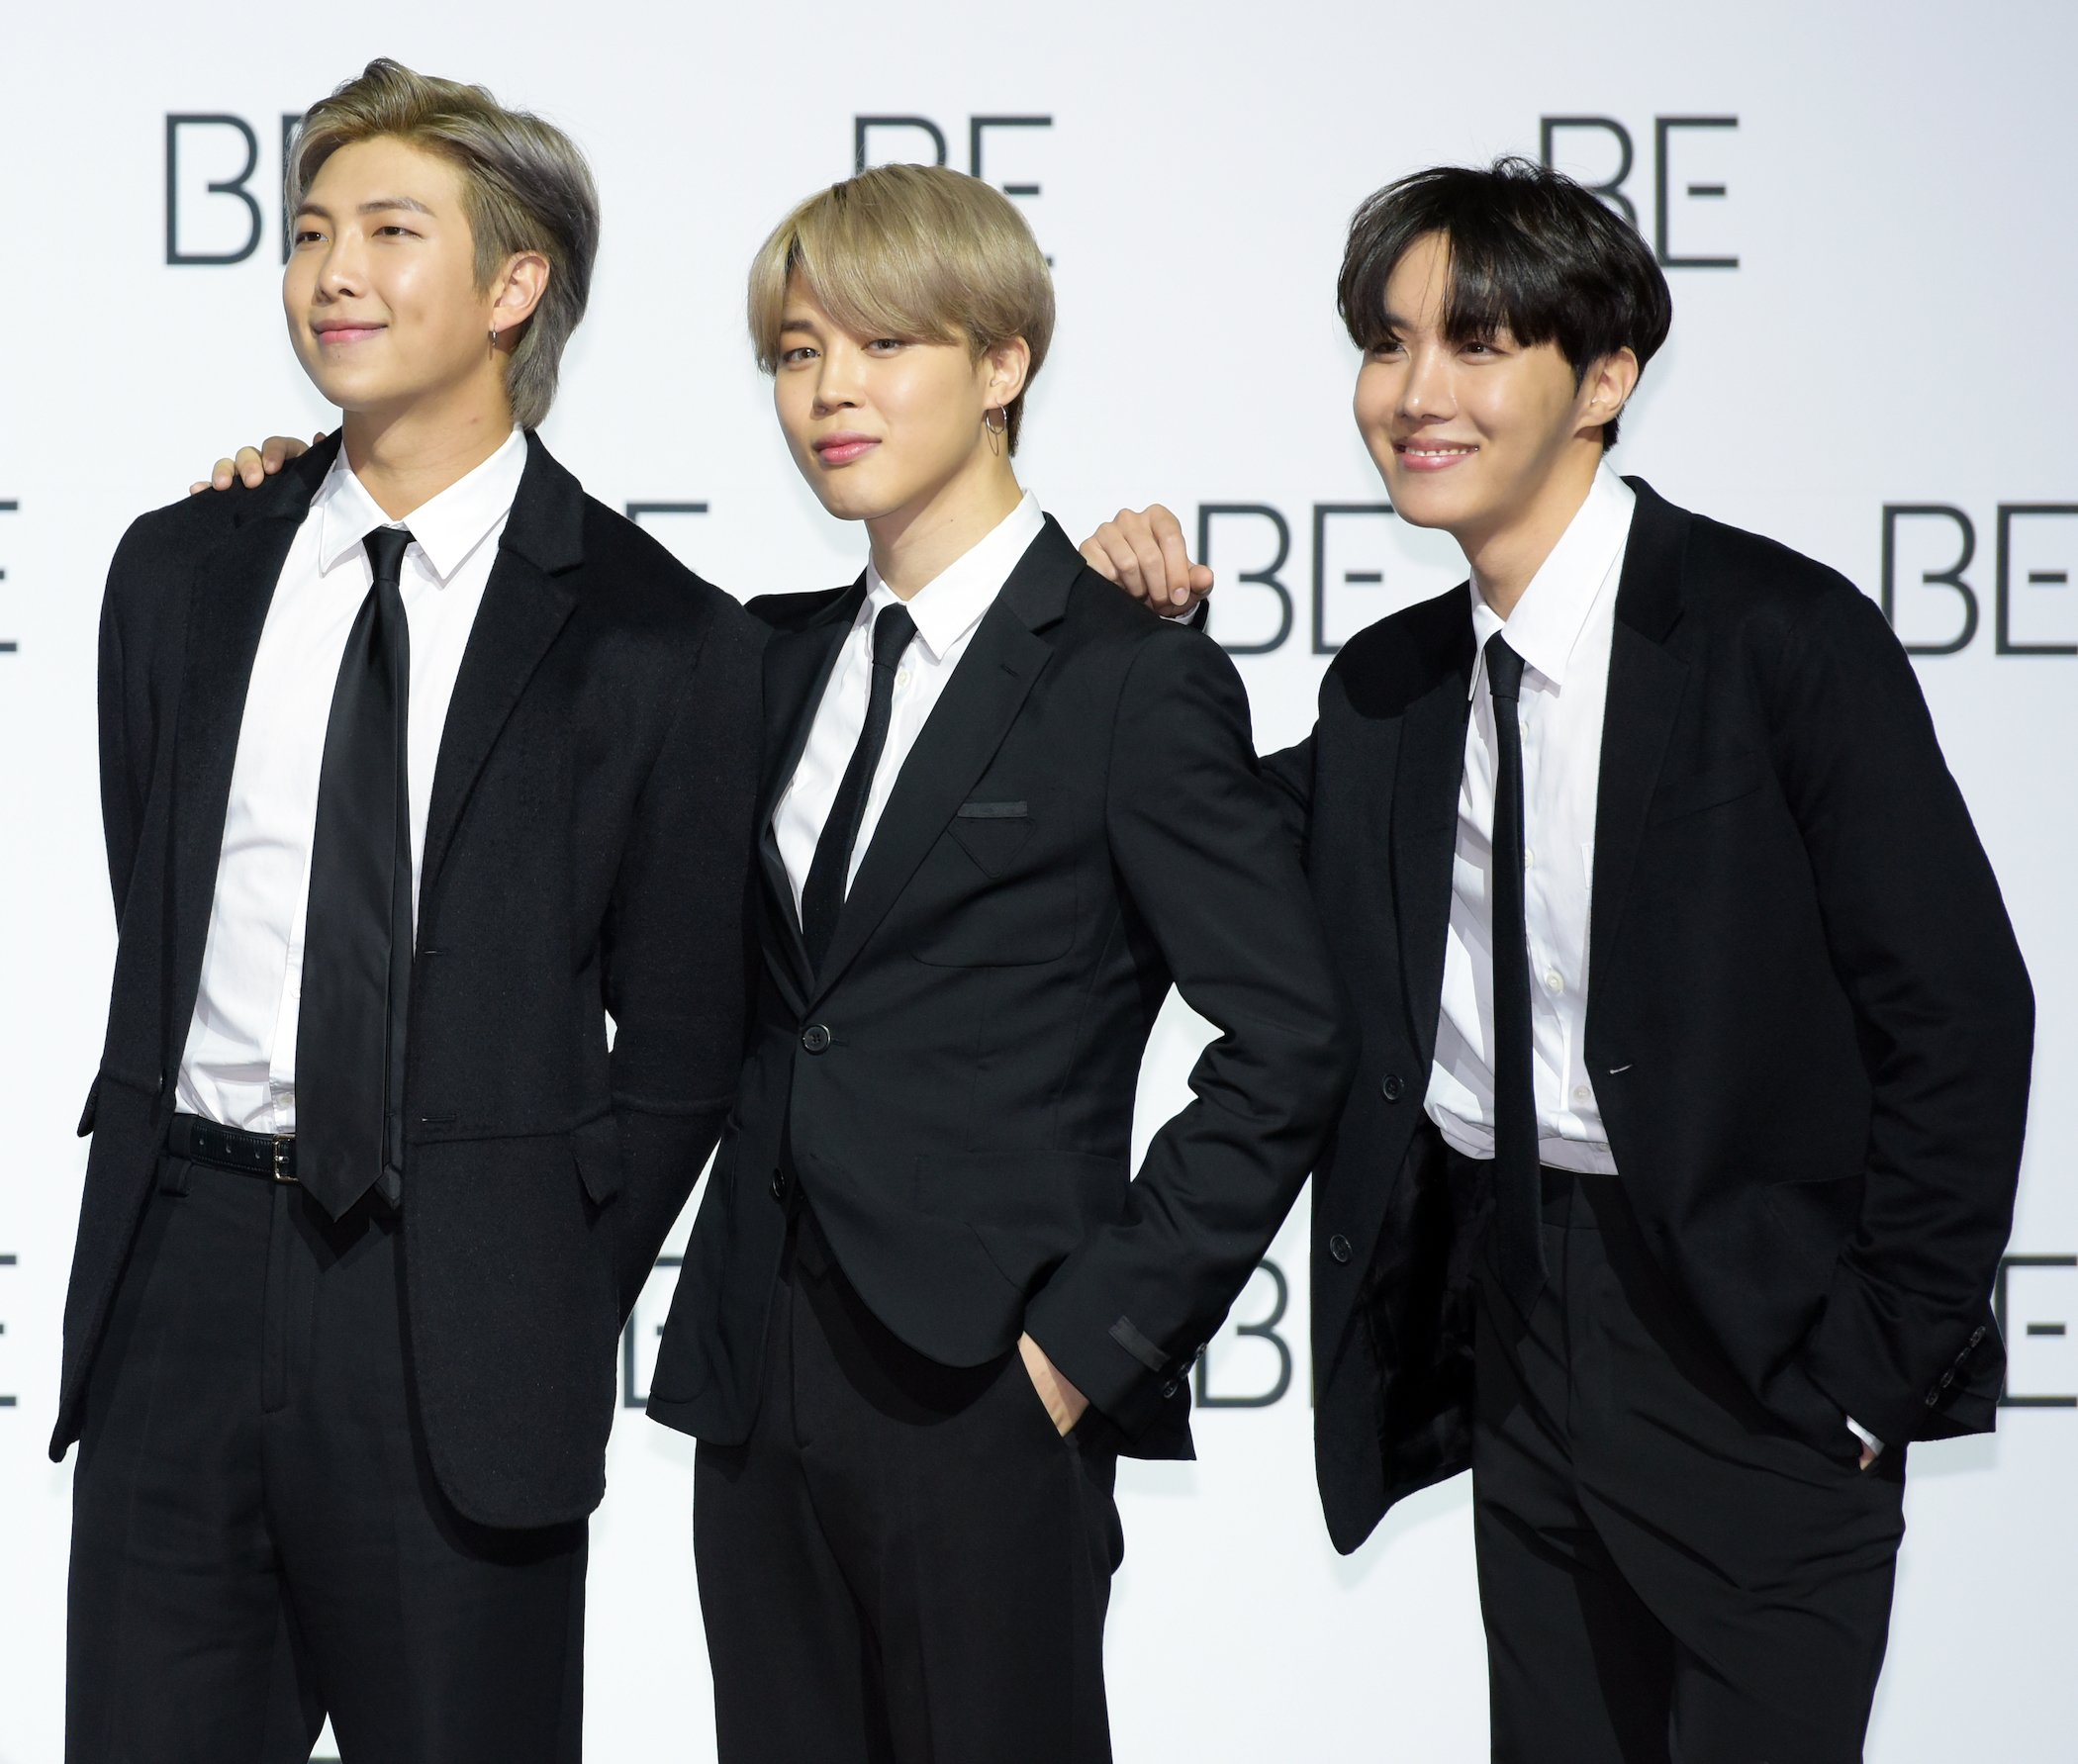 RM, Jimin, and J-Hope of the K-pop boy band, BTS